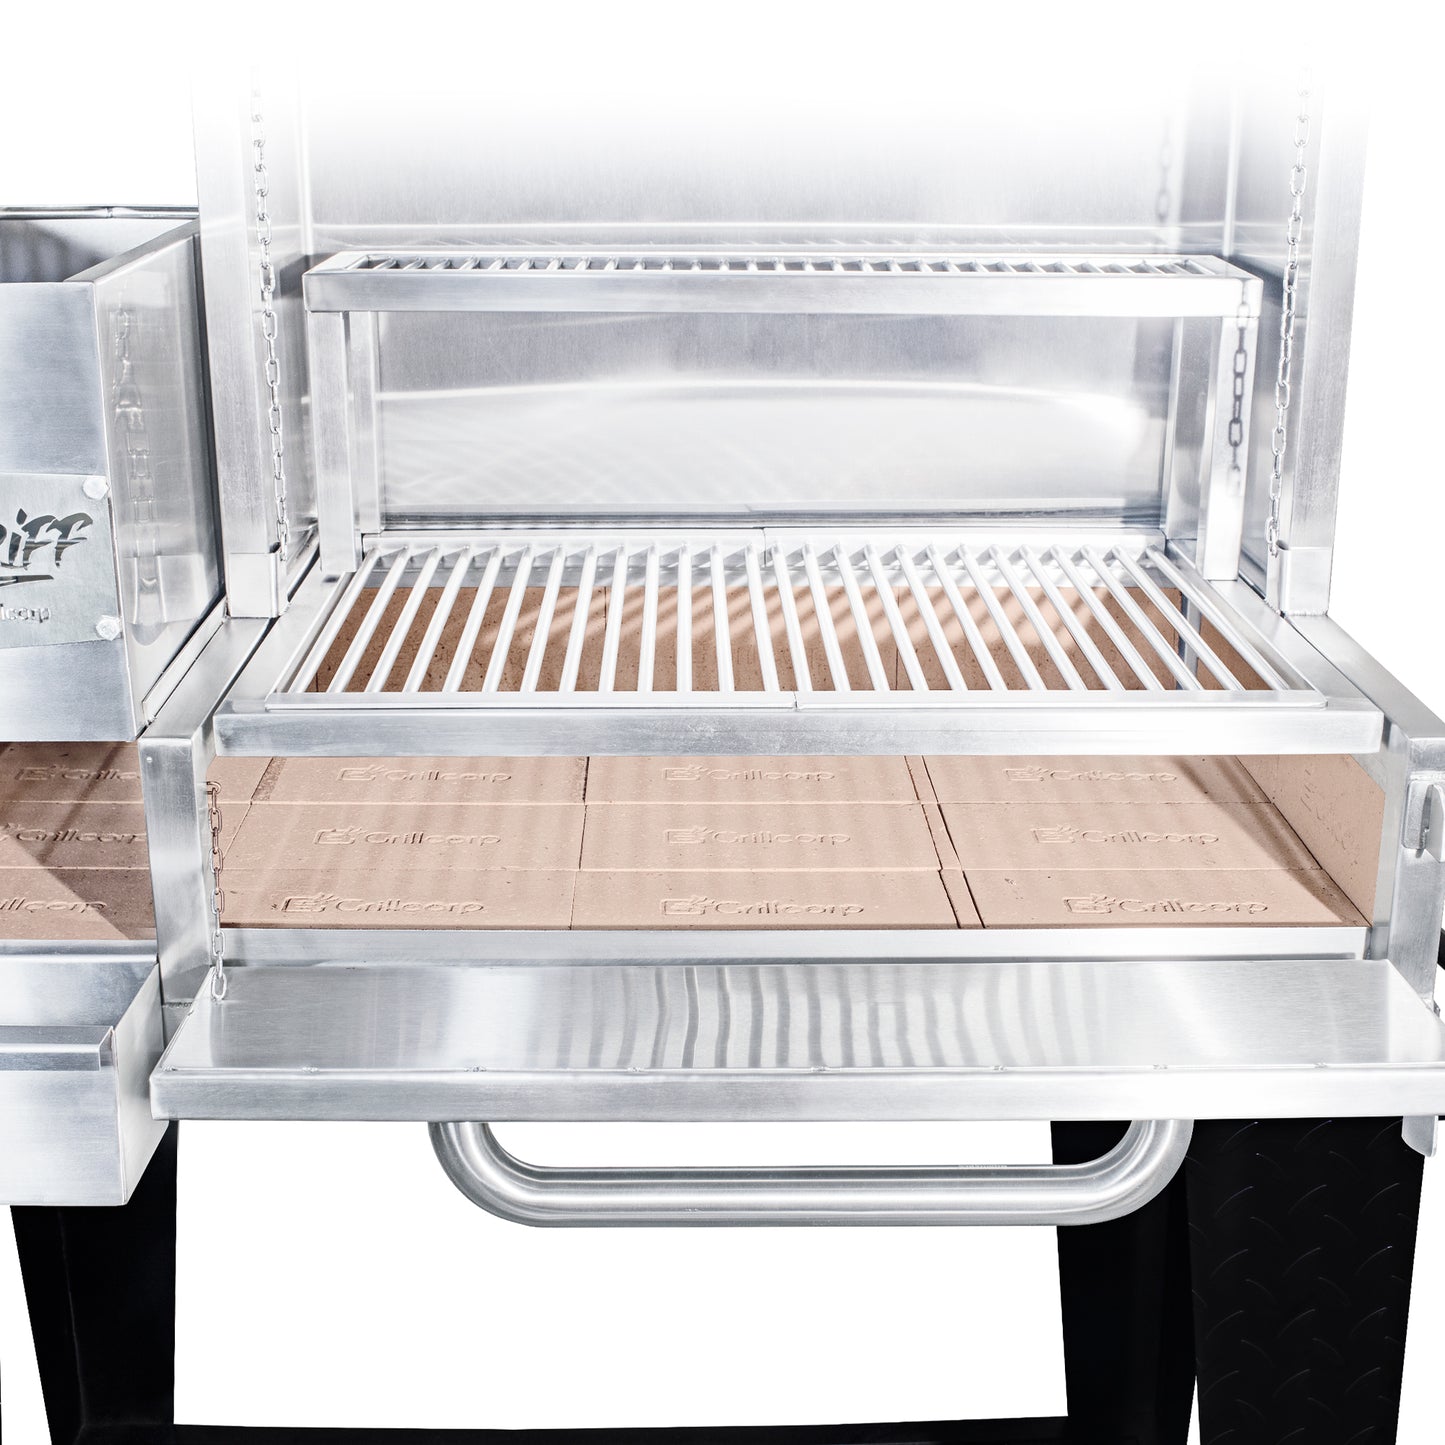 Medium 304 stainless steel Uruguayan model grill with lifting system